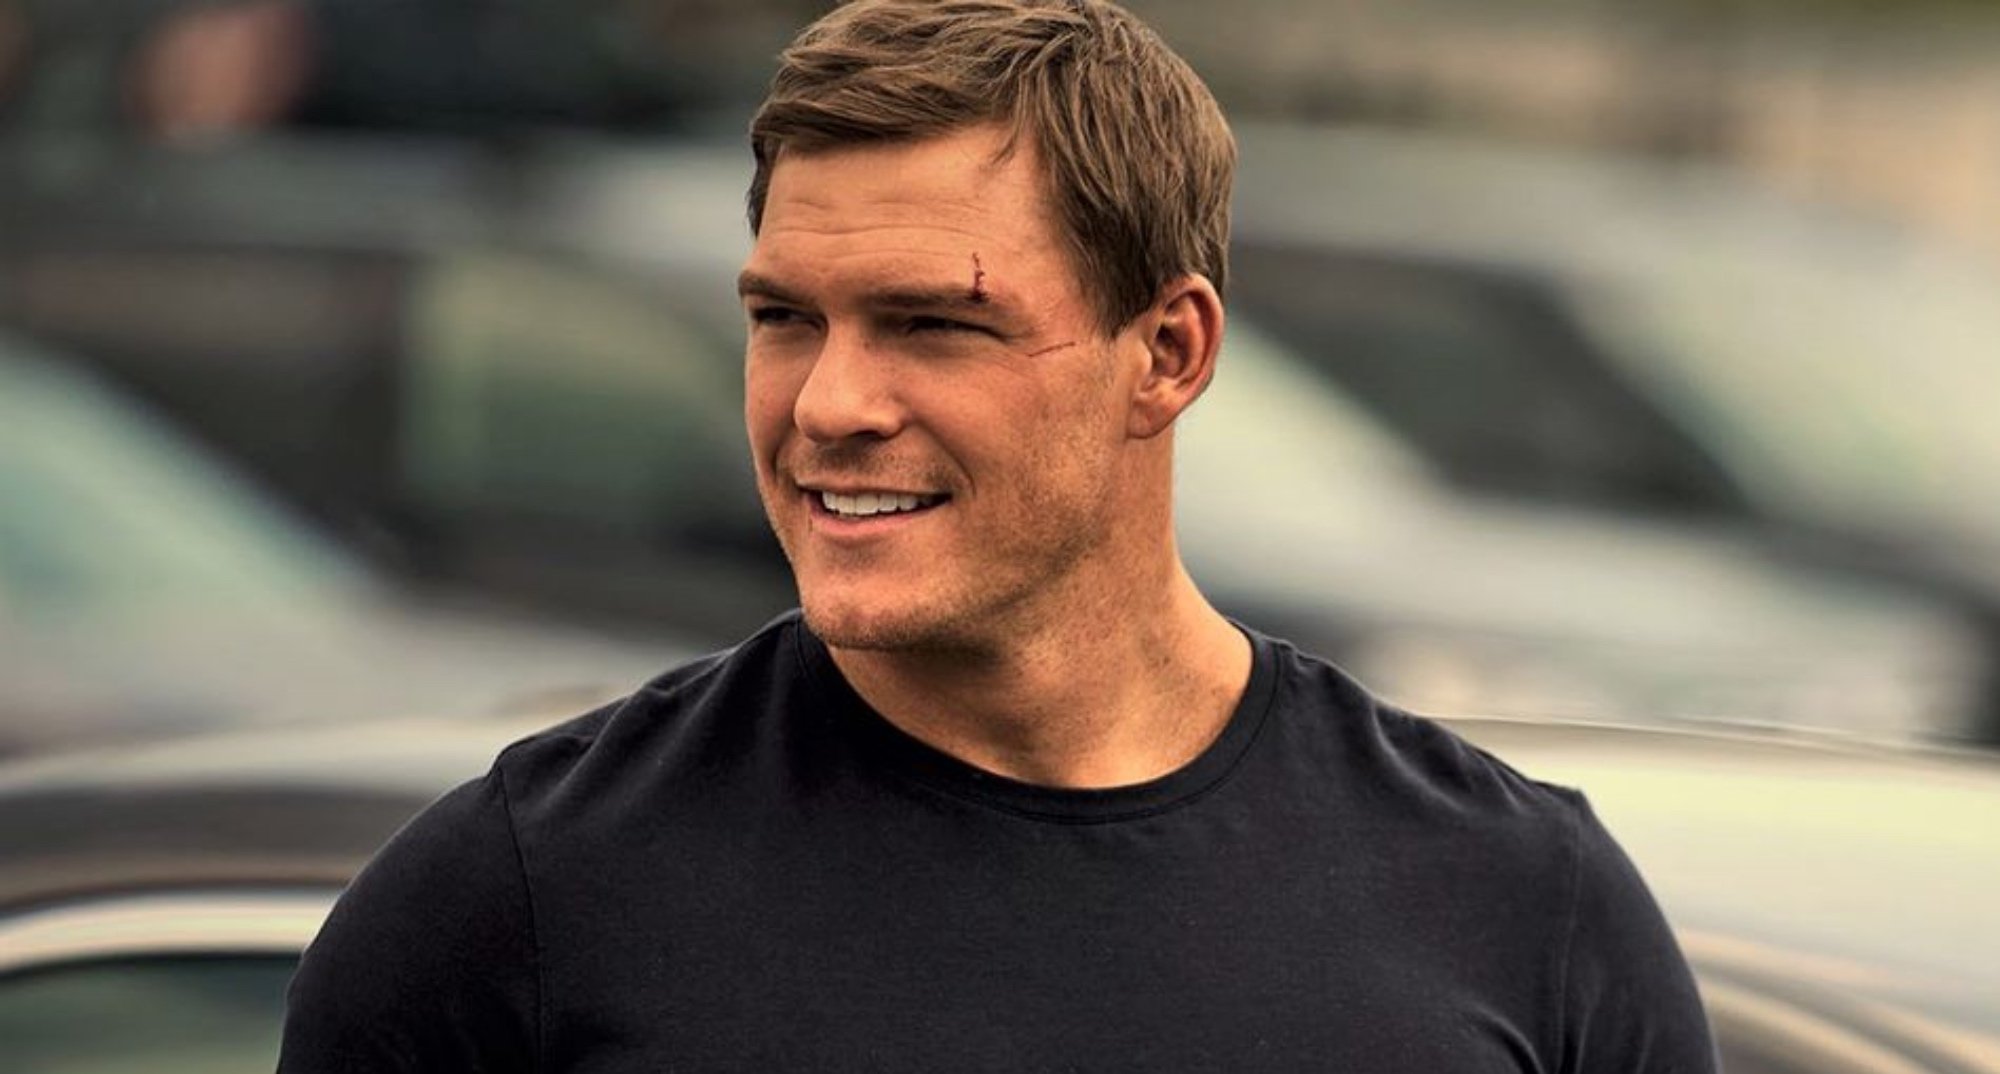 Alan Ritchson as Jack Reacher in 'Reacher' smiling and wearing brown shirt.